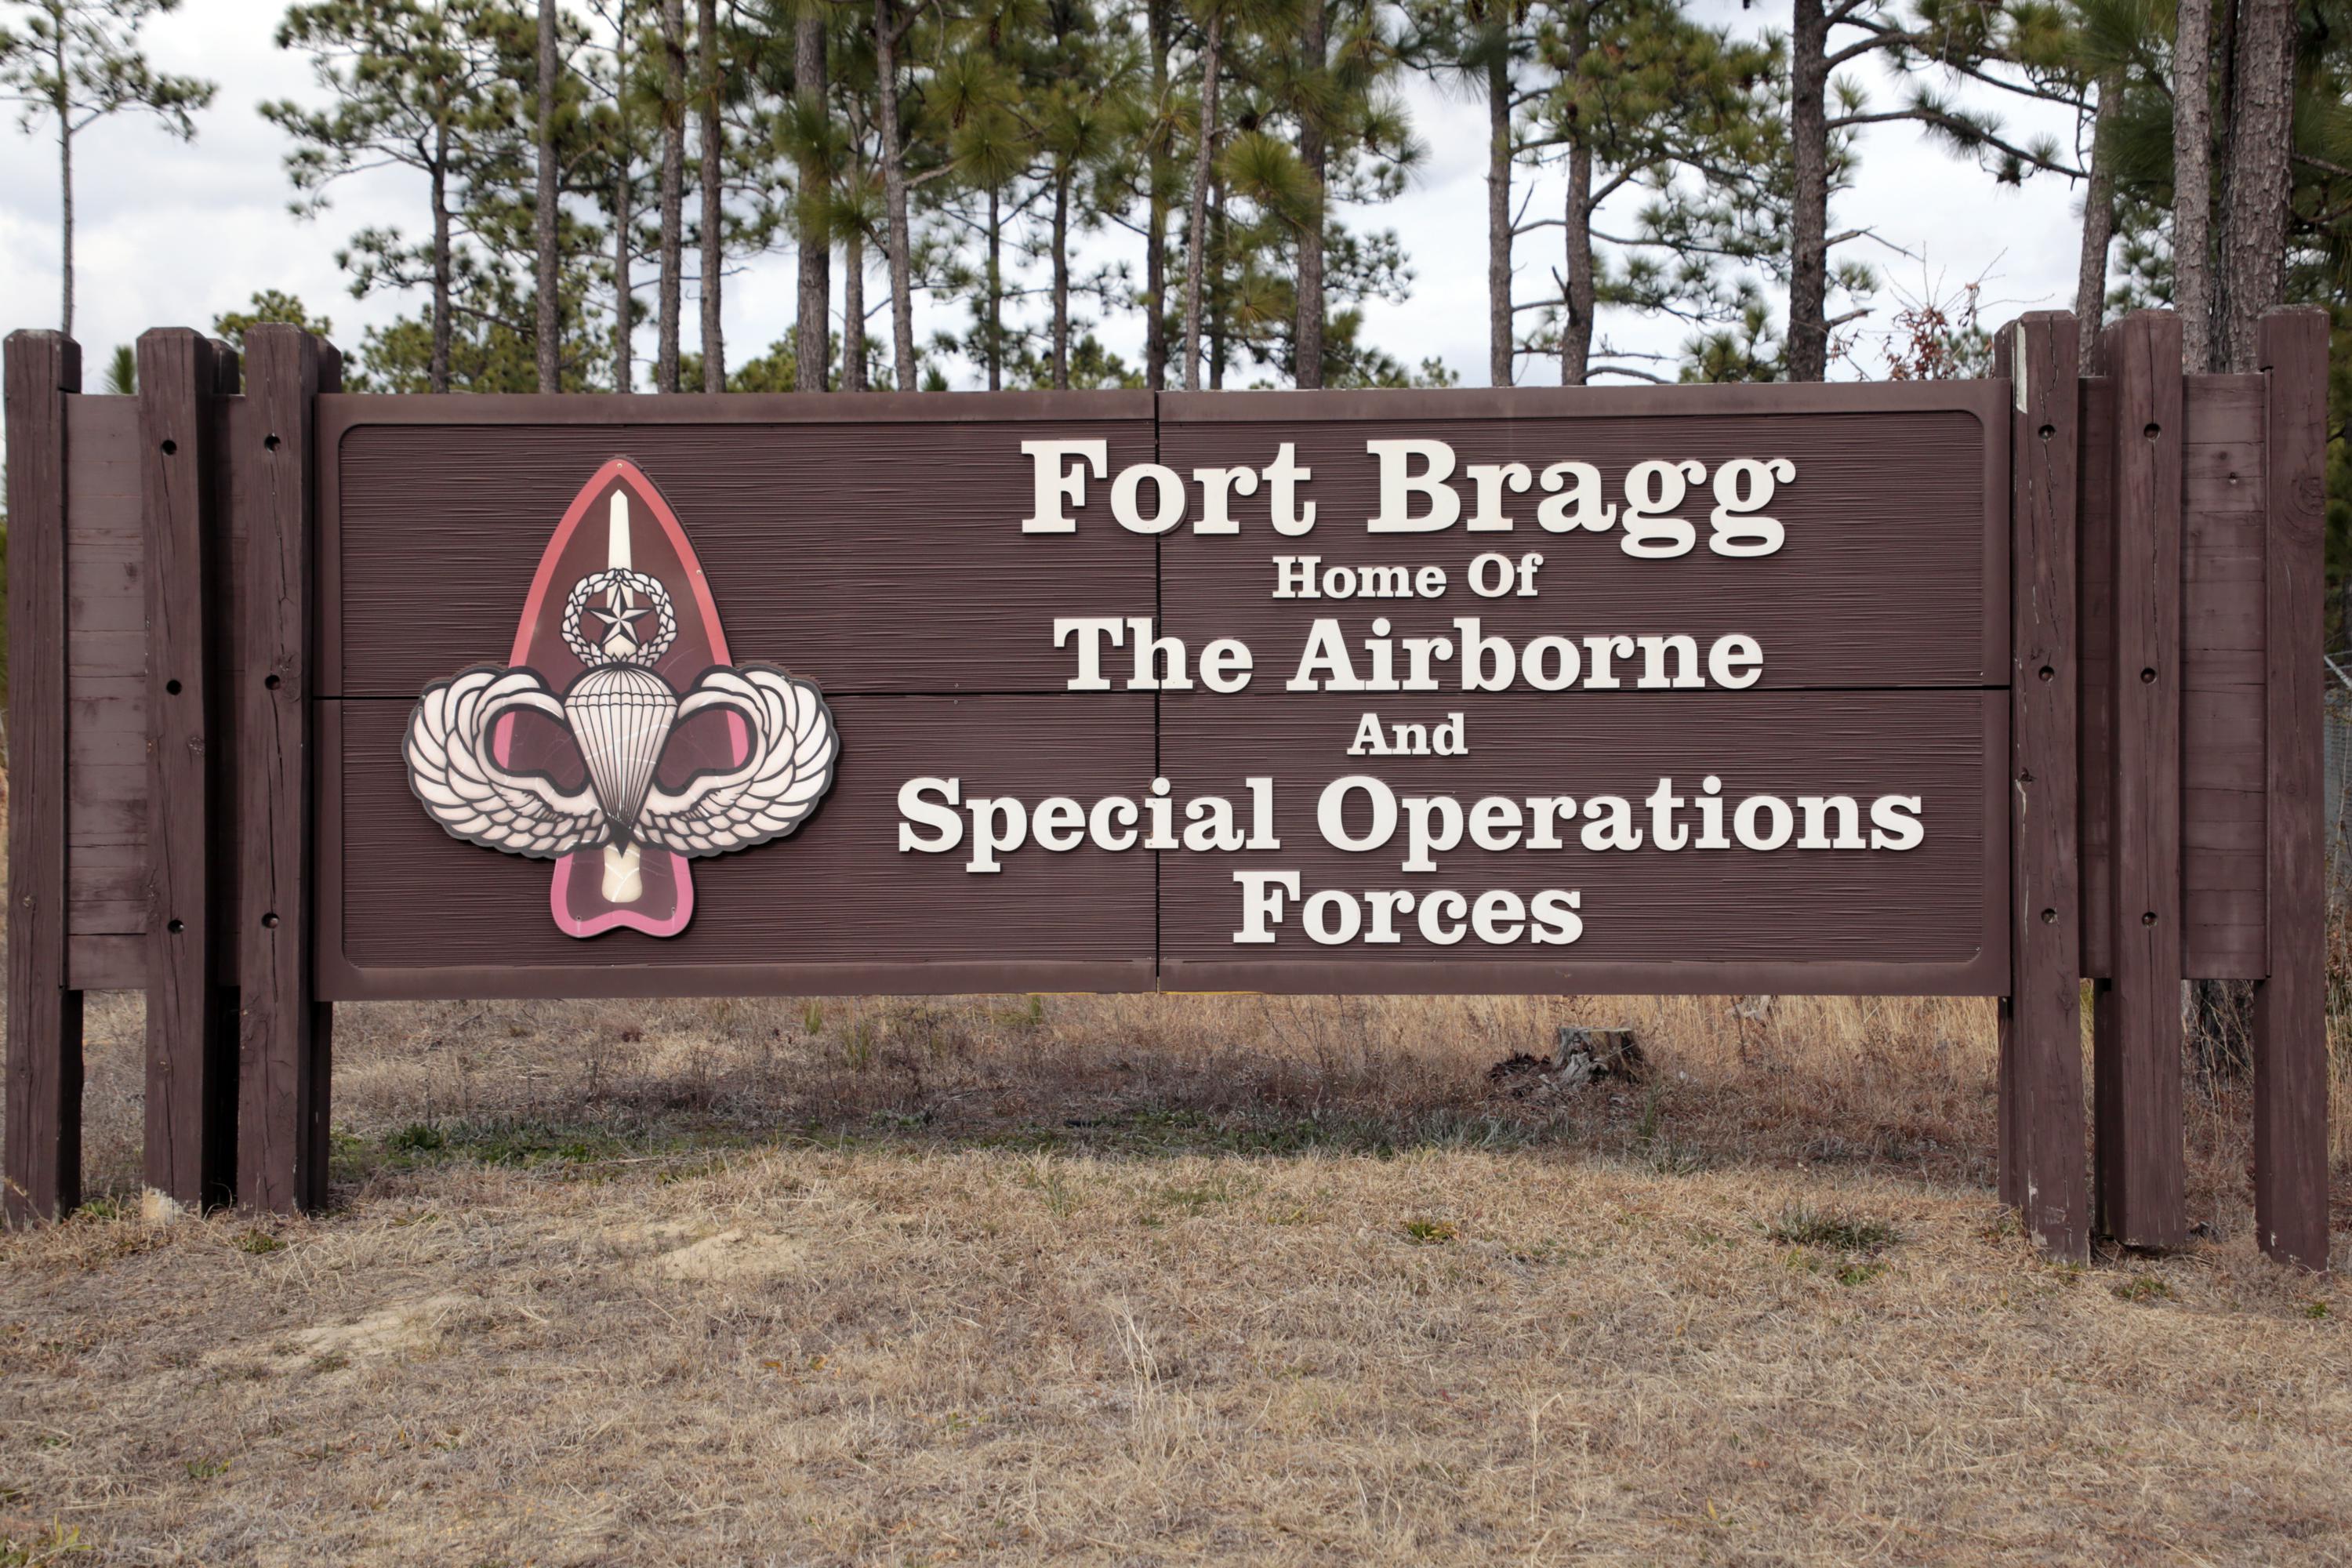 Fort Bragg Could Have Its Name Changed to Fort Liberty Because It Is Named After Confederate General Braxton Bragg